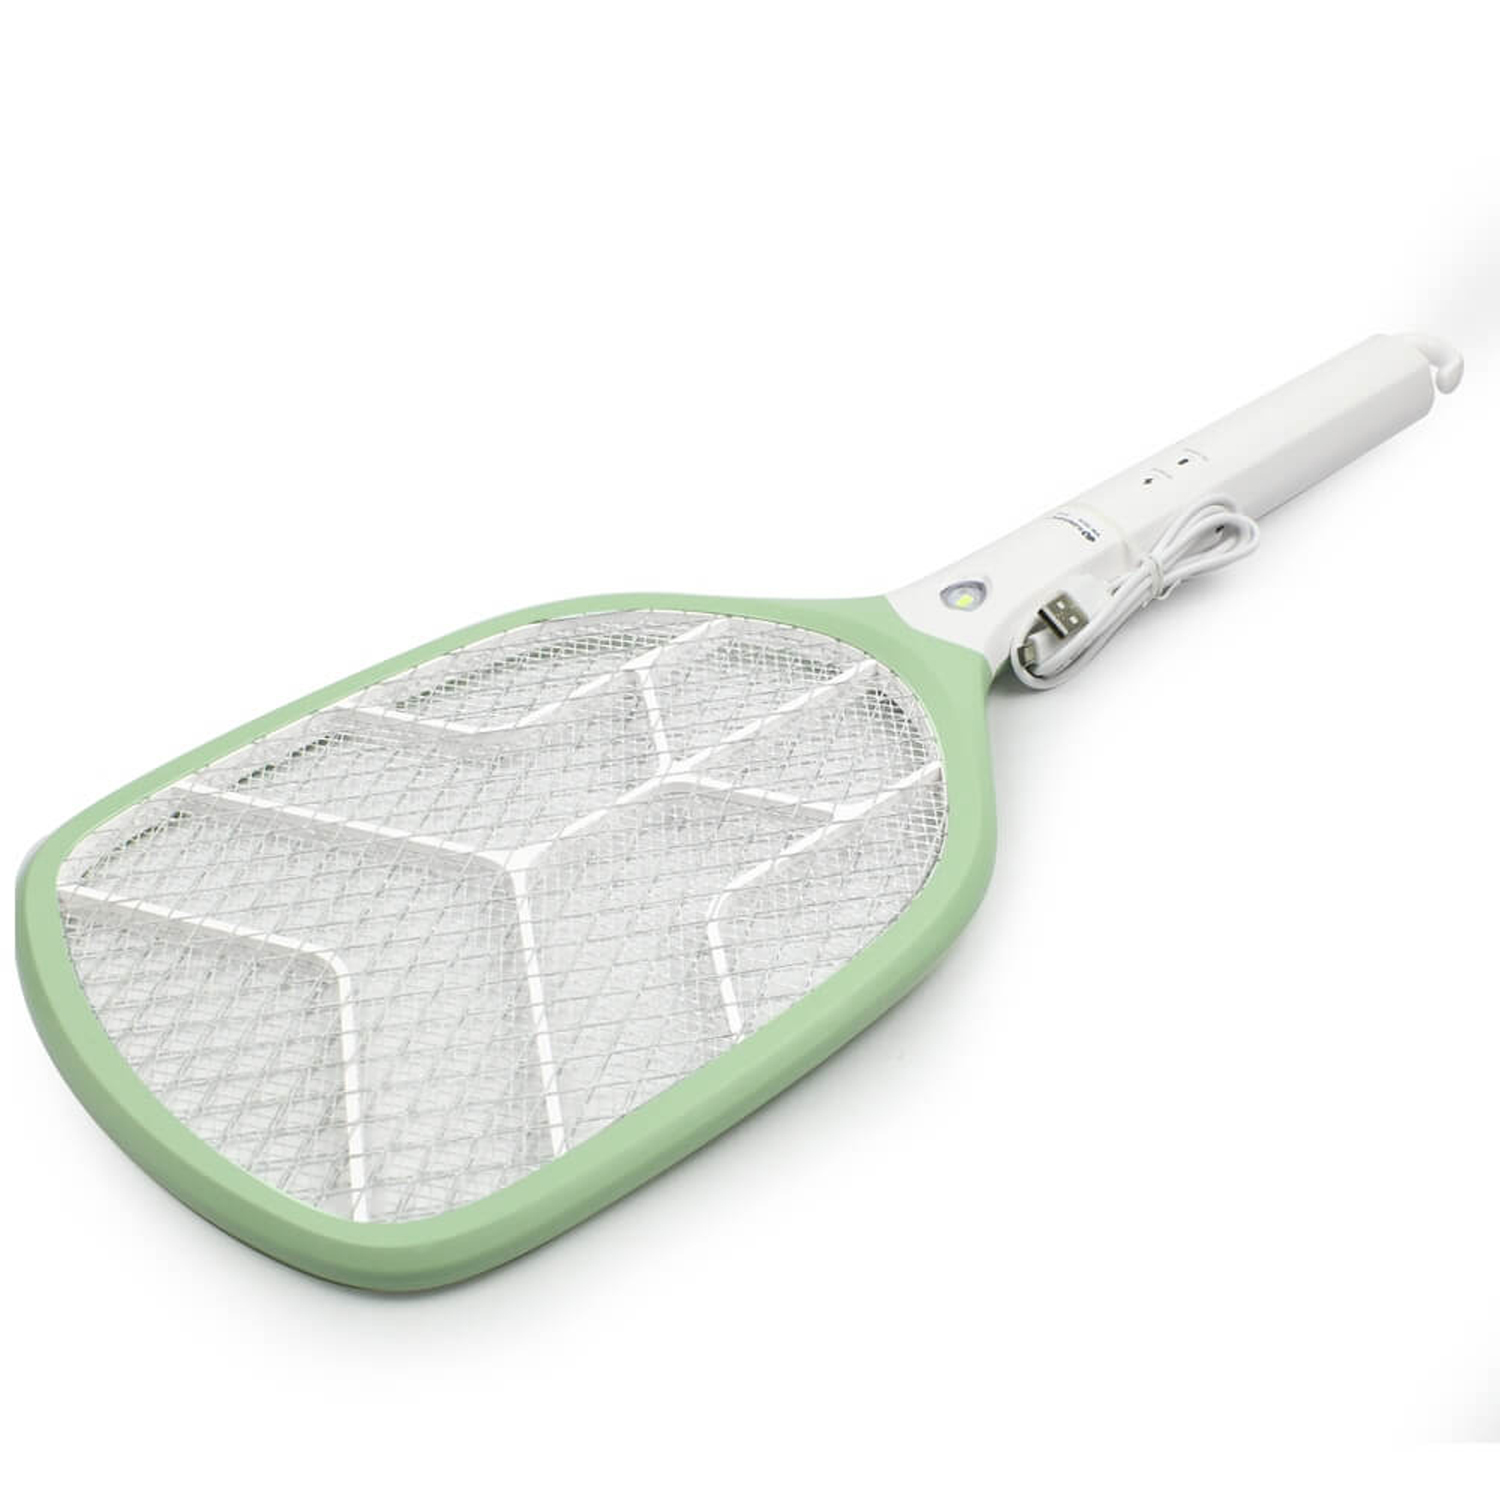 Buylink High Quality Mosquito Racket/Bat with Torch with Wire Charging Electric Insect Killer  MQTBat 